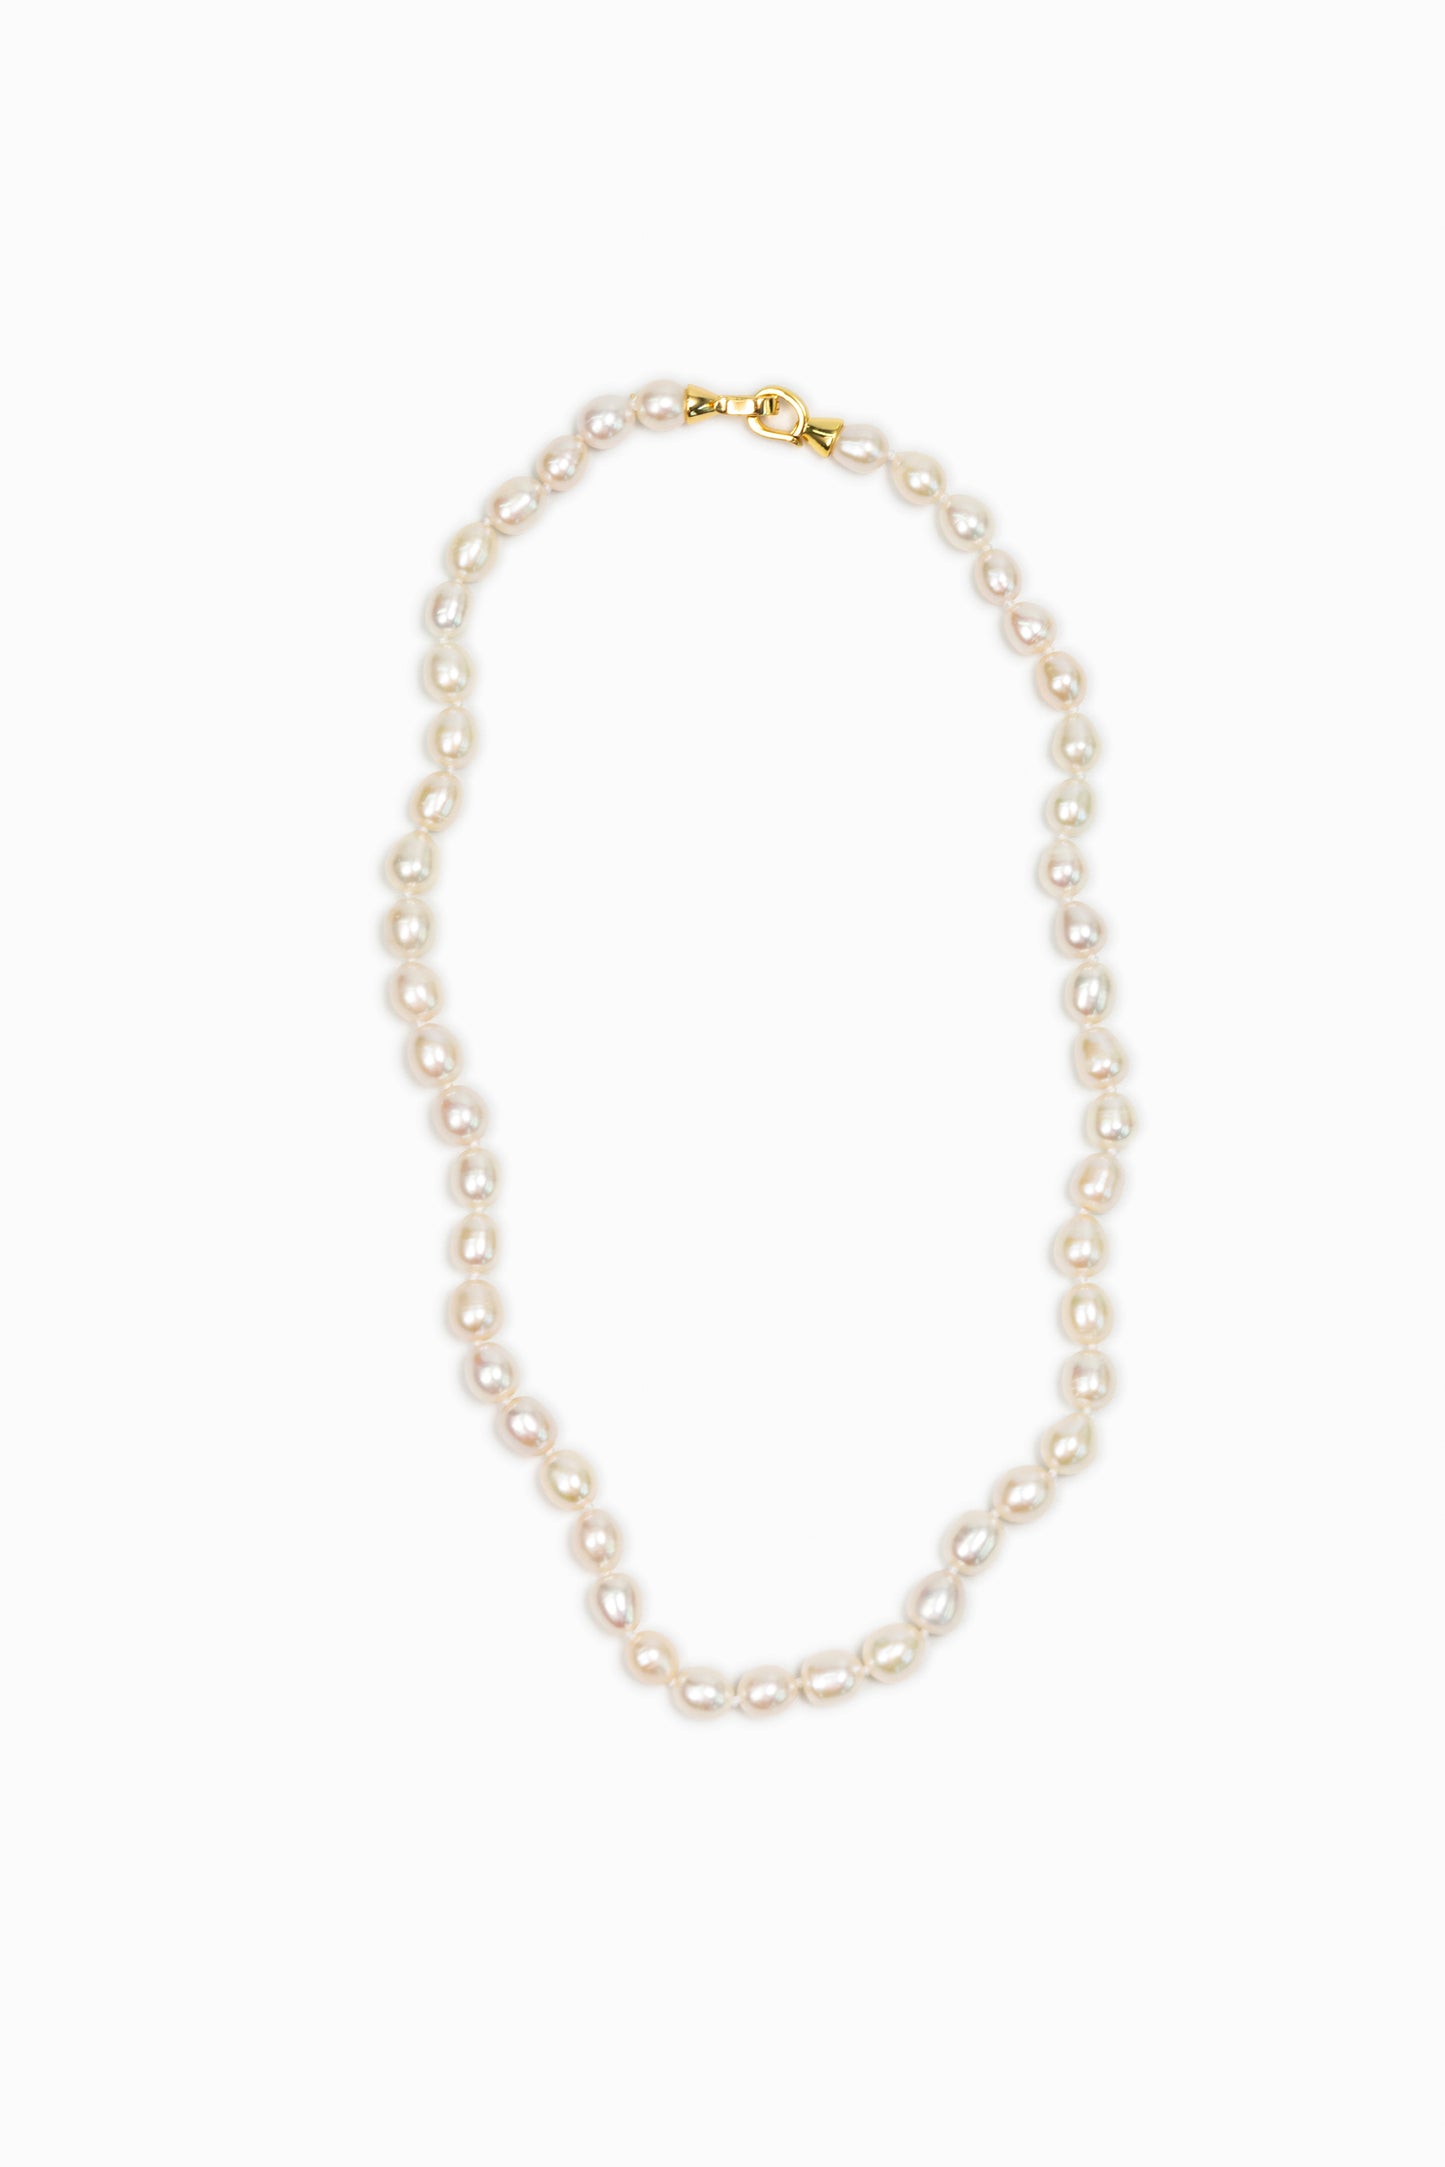 18K Gold Freshwater Pearls Necklace for Women